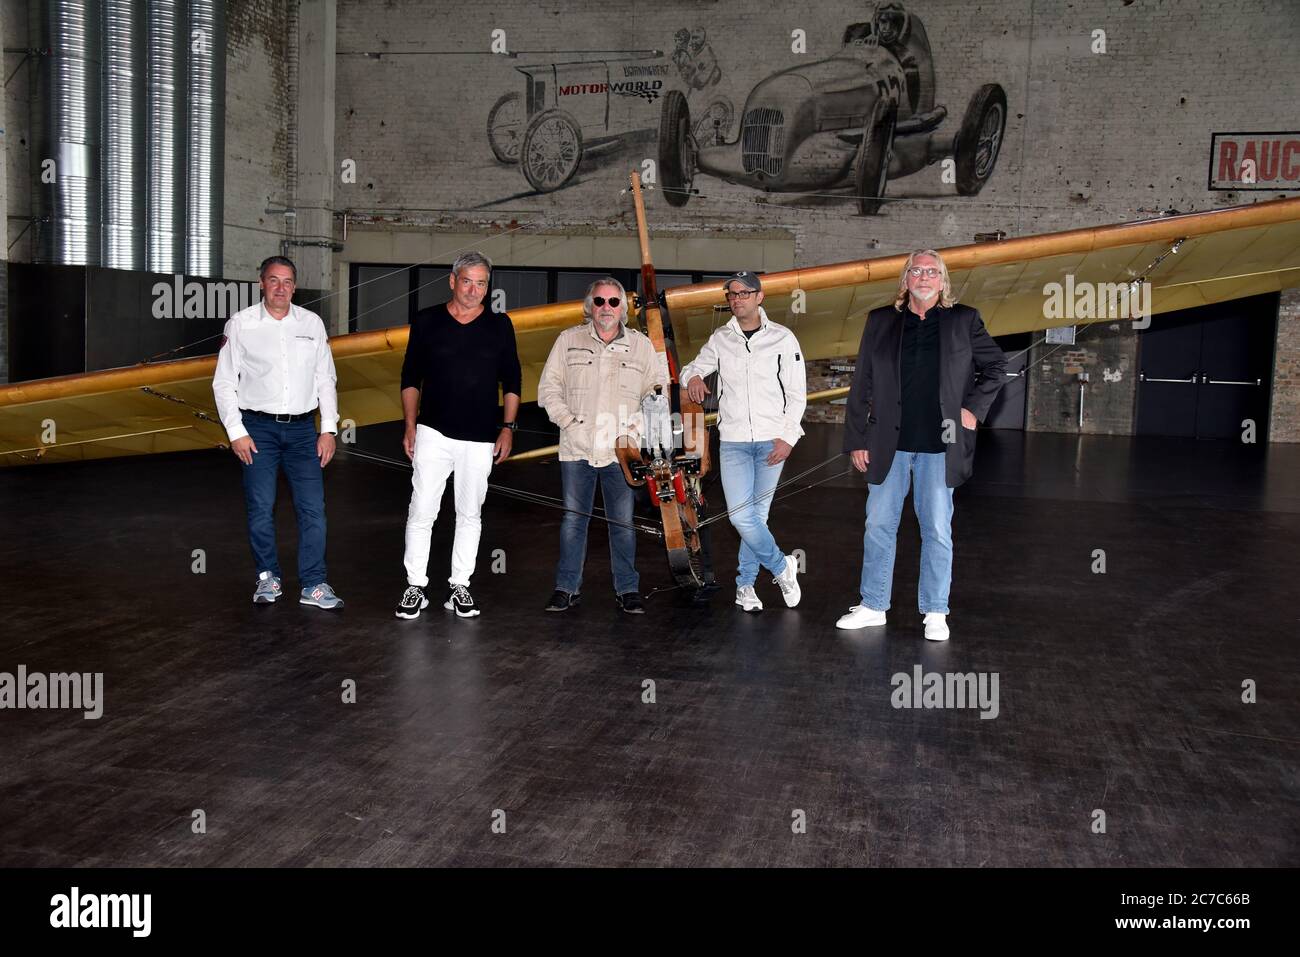 Cologne, Germany. 15th July, 2020. Dirk Strohmenger, Center- and Facility Manager at MOTORWORLD, Jürgen Walter, Catering Auftischt, musician Tommy Engel, comedian Marc Metzger and musician Jürgen Fritz pose on a school glider SG 38, glider from 1942, at the presentation of the safety and hygiene concept of the dinner show 'Weihnachtsengel' which will be shown from 20.11.2020. Credit: Horst Galuschka/dpa/Alamy Live News Stock Photo